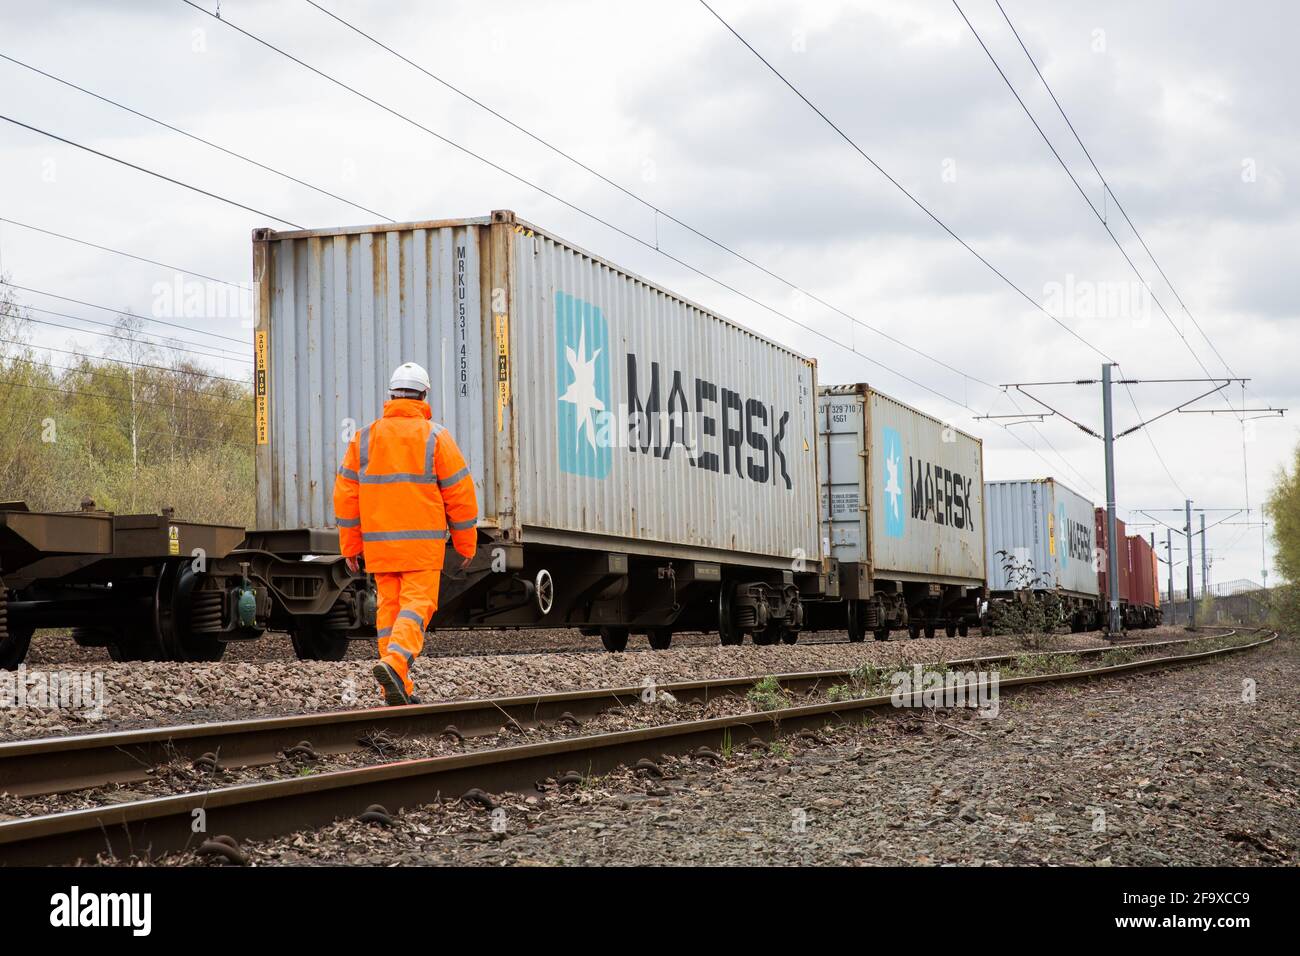 DONCASTER, UK - APRIL, 4, 2021.  A railway worker inspecting a Maersk shipping container freight train on the UK rail network before export or import. Stock Photo